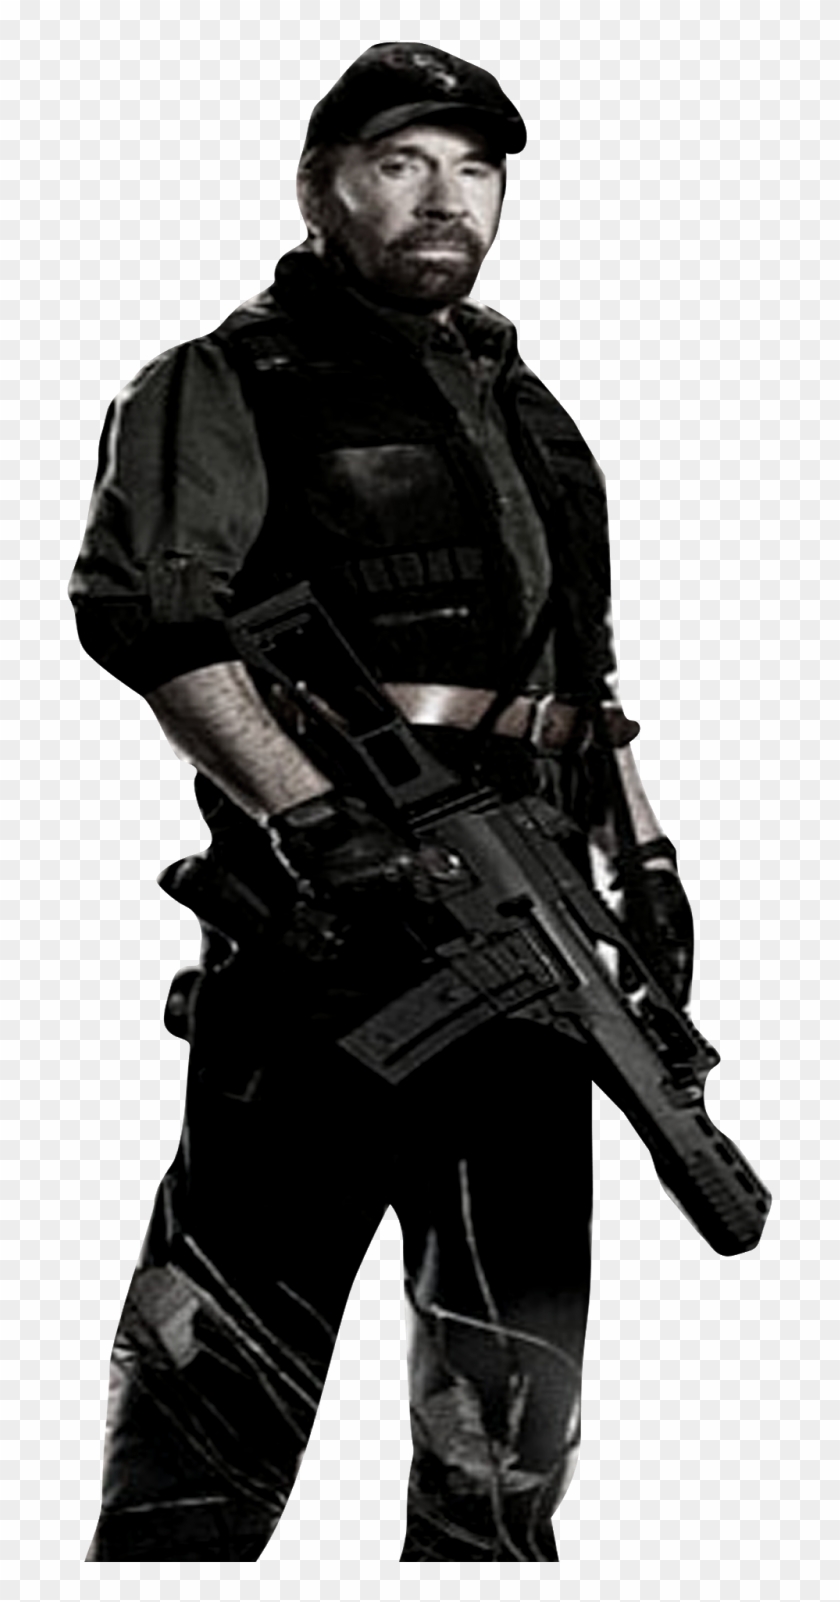 Chuck Norris Png File - Chuck Norris The Expendables Png #1752524